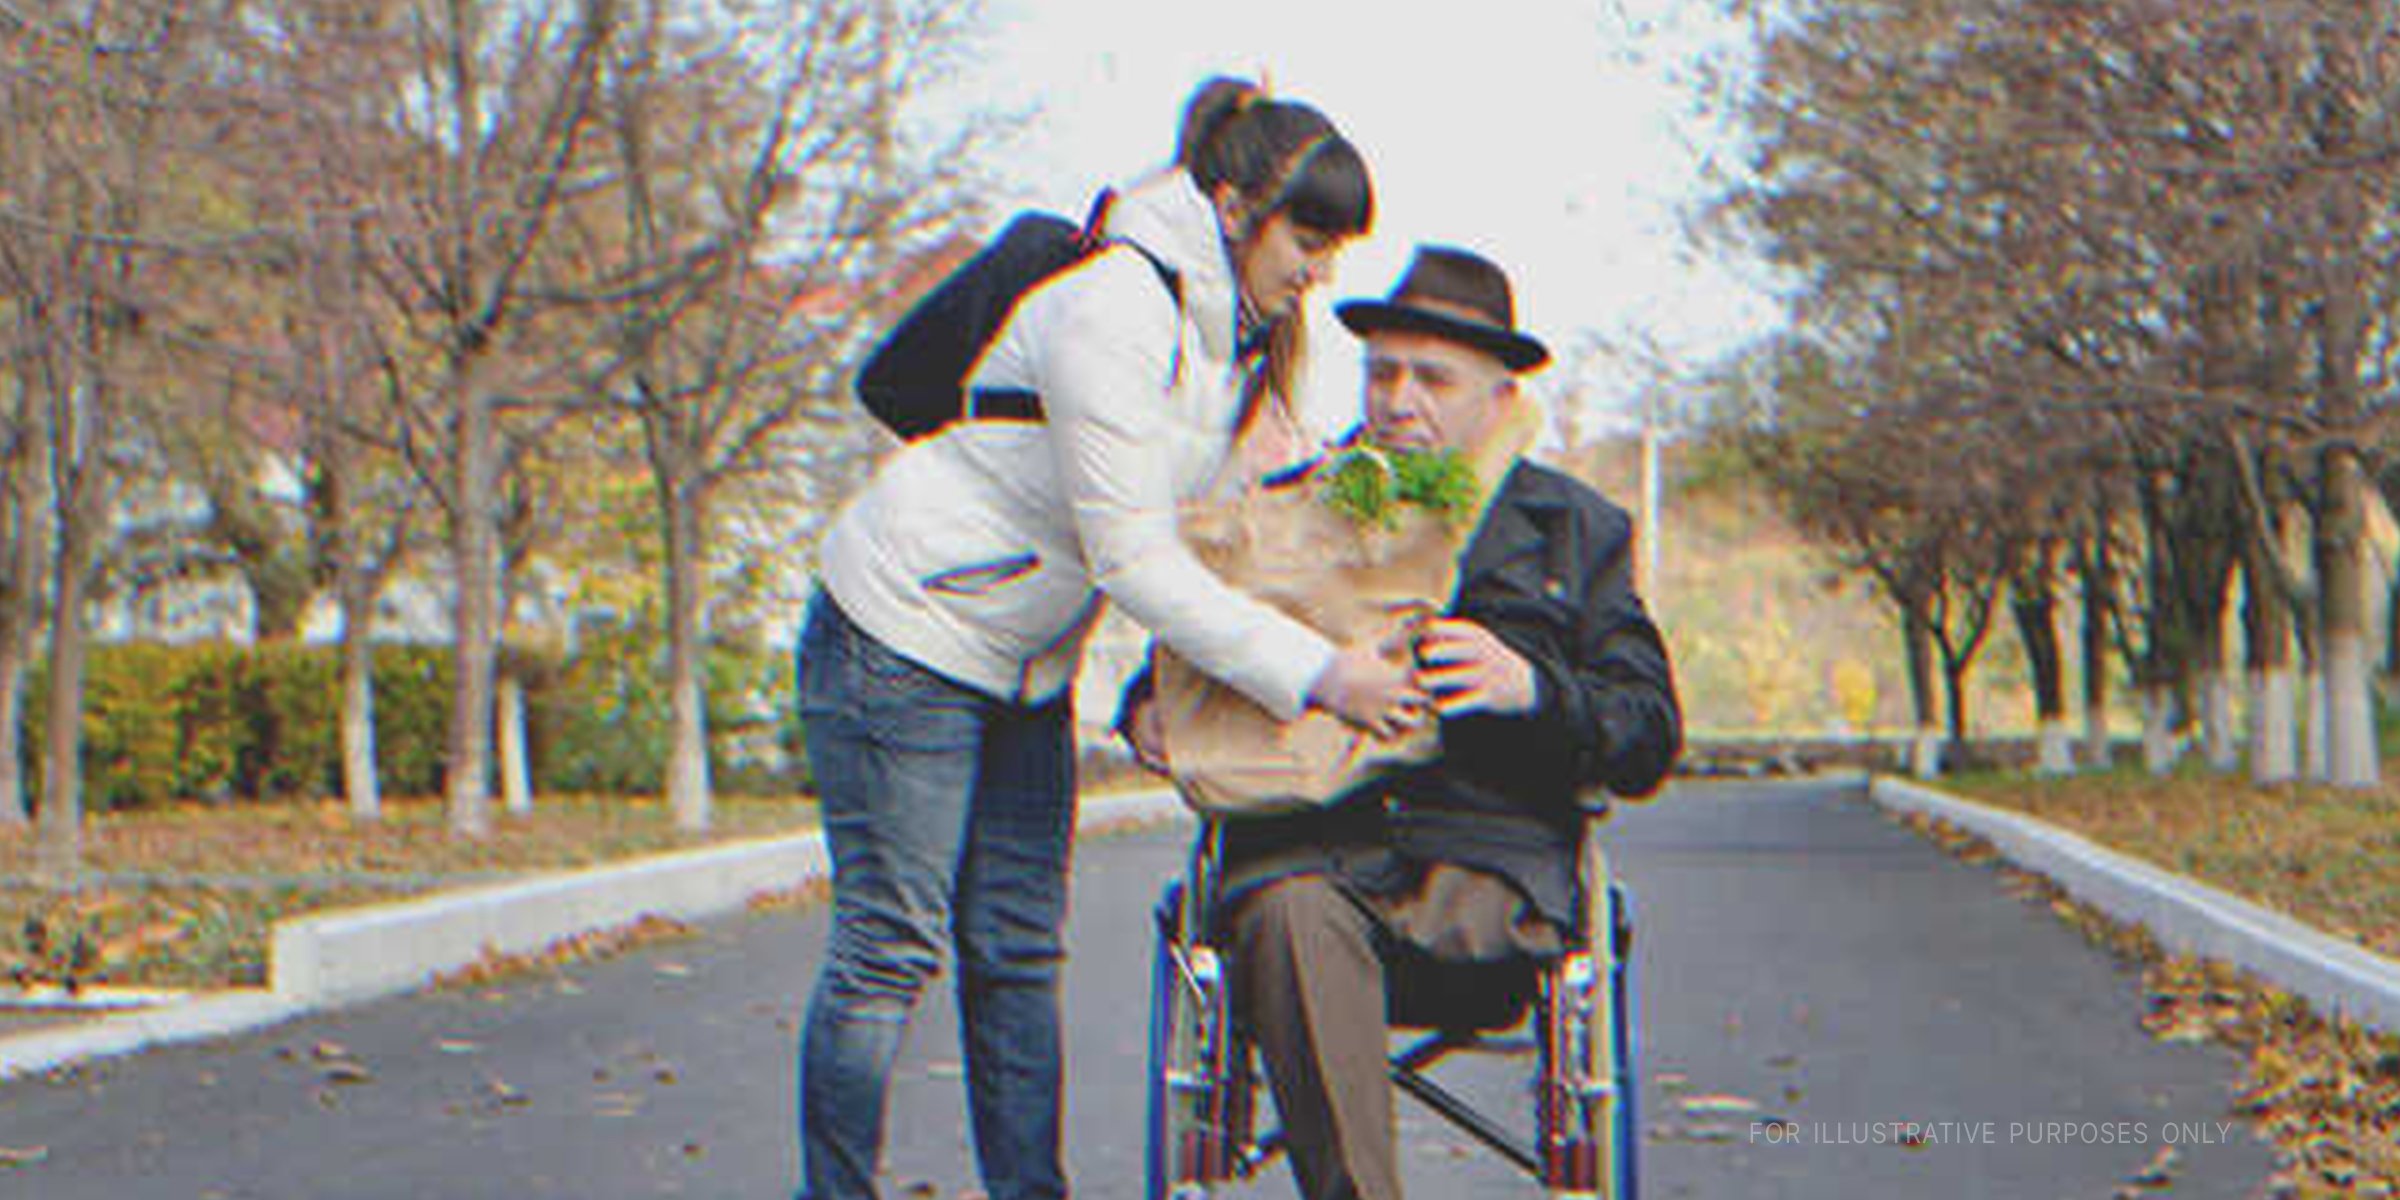 Woman helps a disabled older man with a bag of groceries | Source: Shutterstock